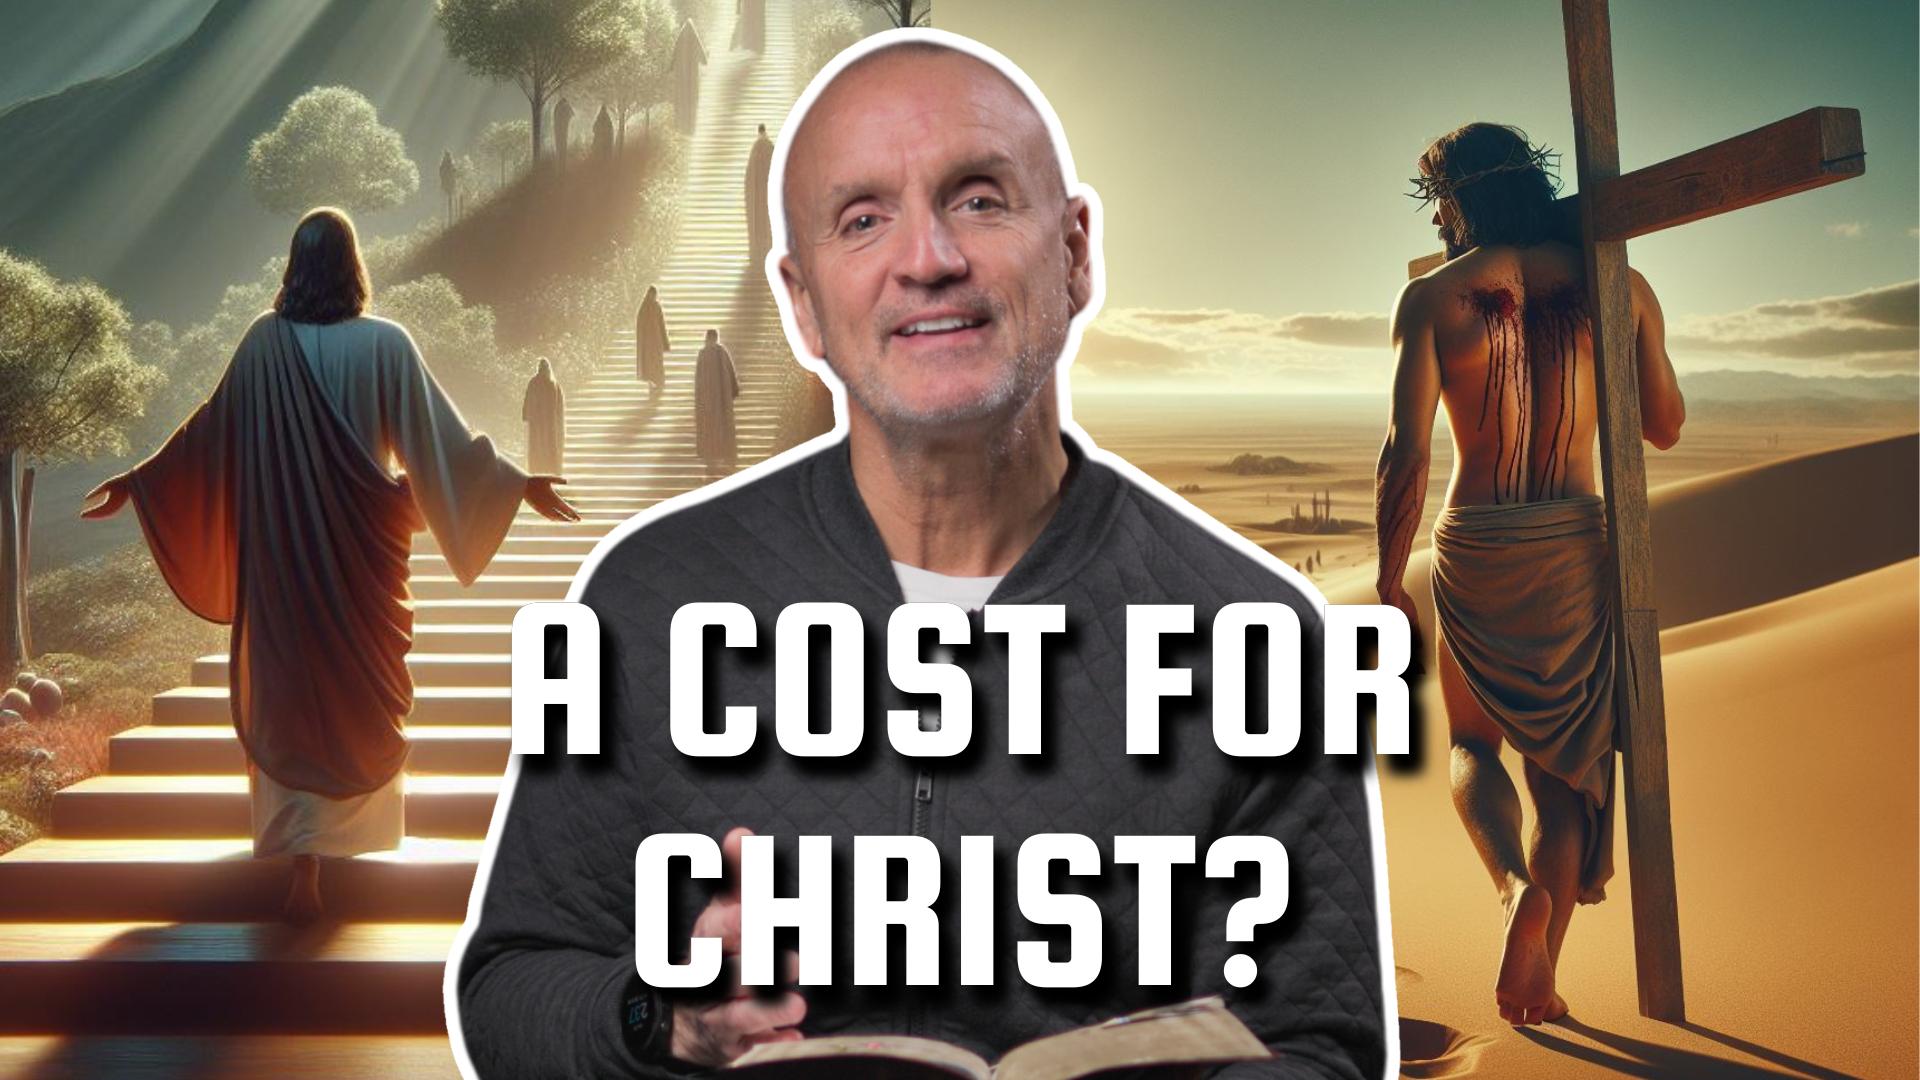 What Does it Cost to Follow Christ?